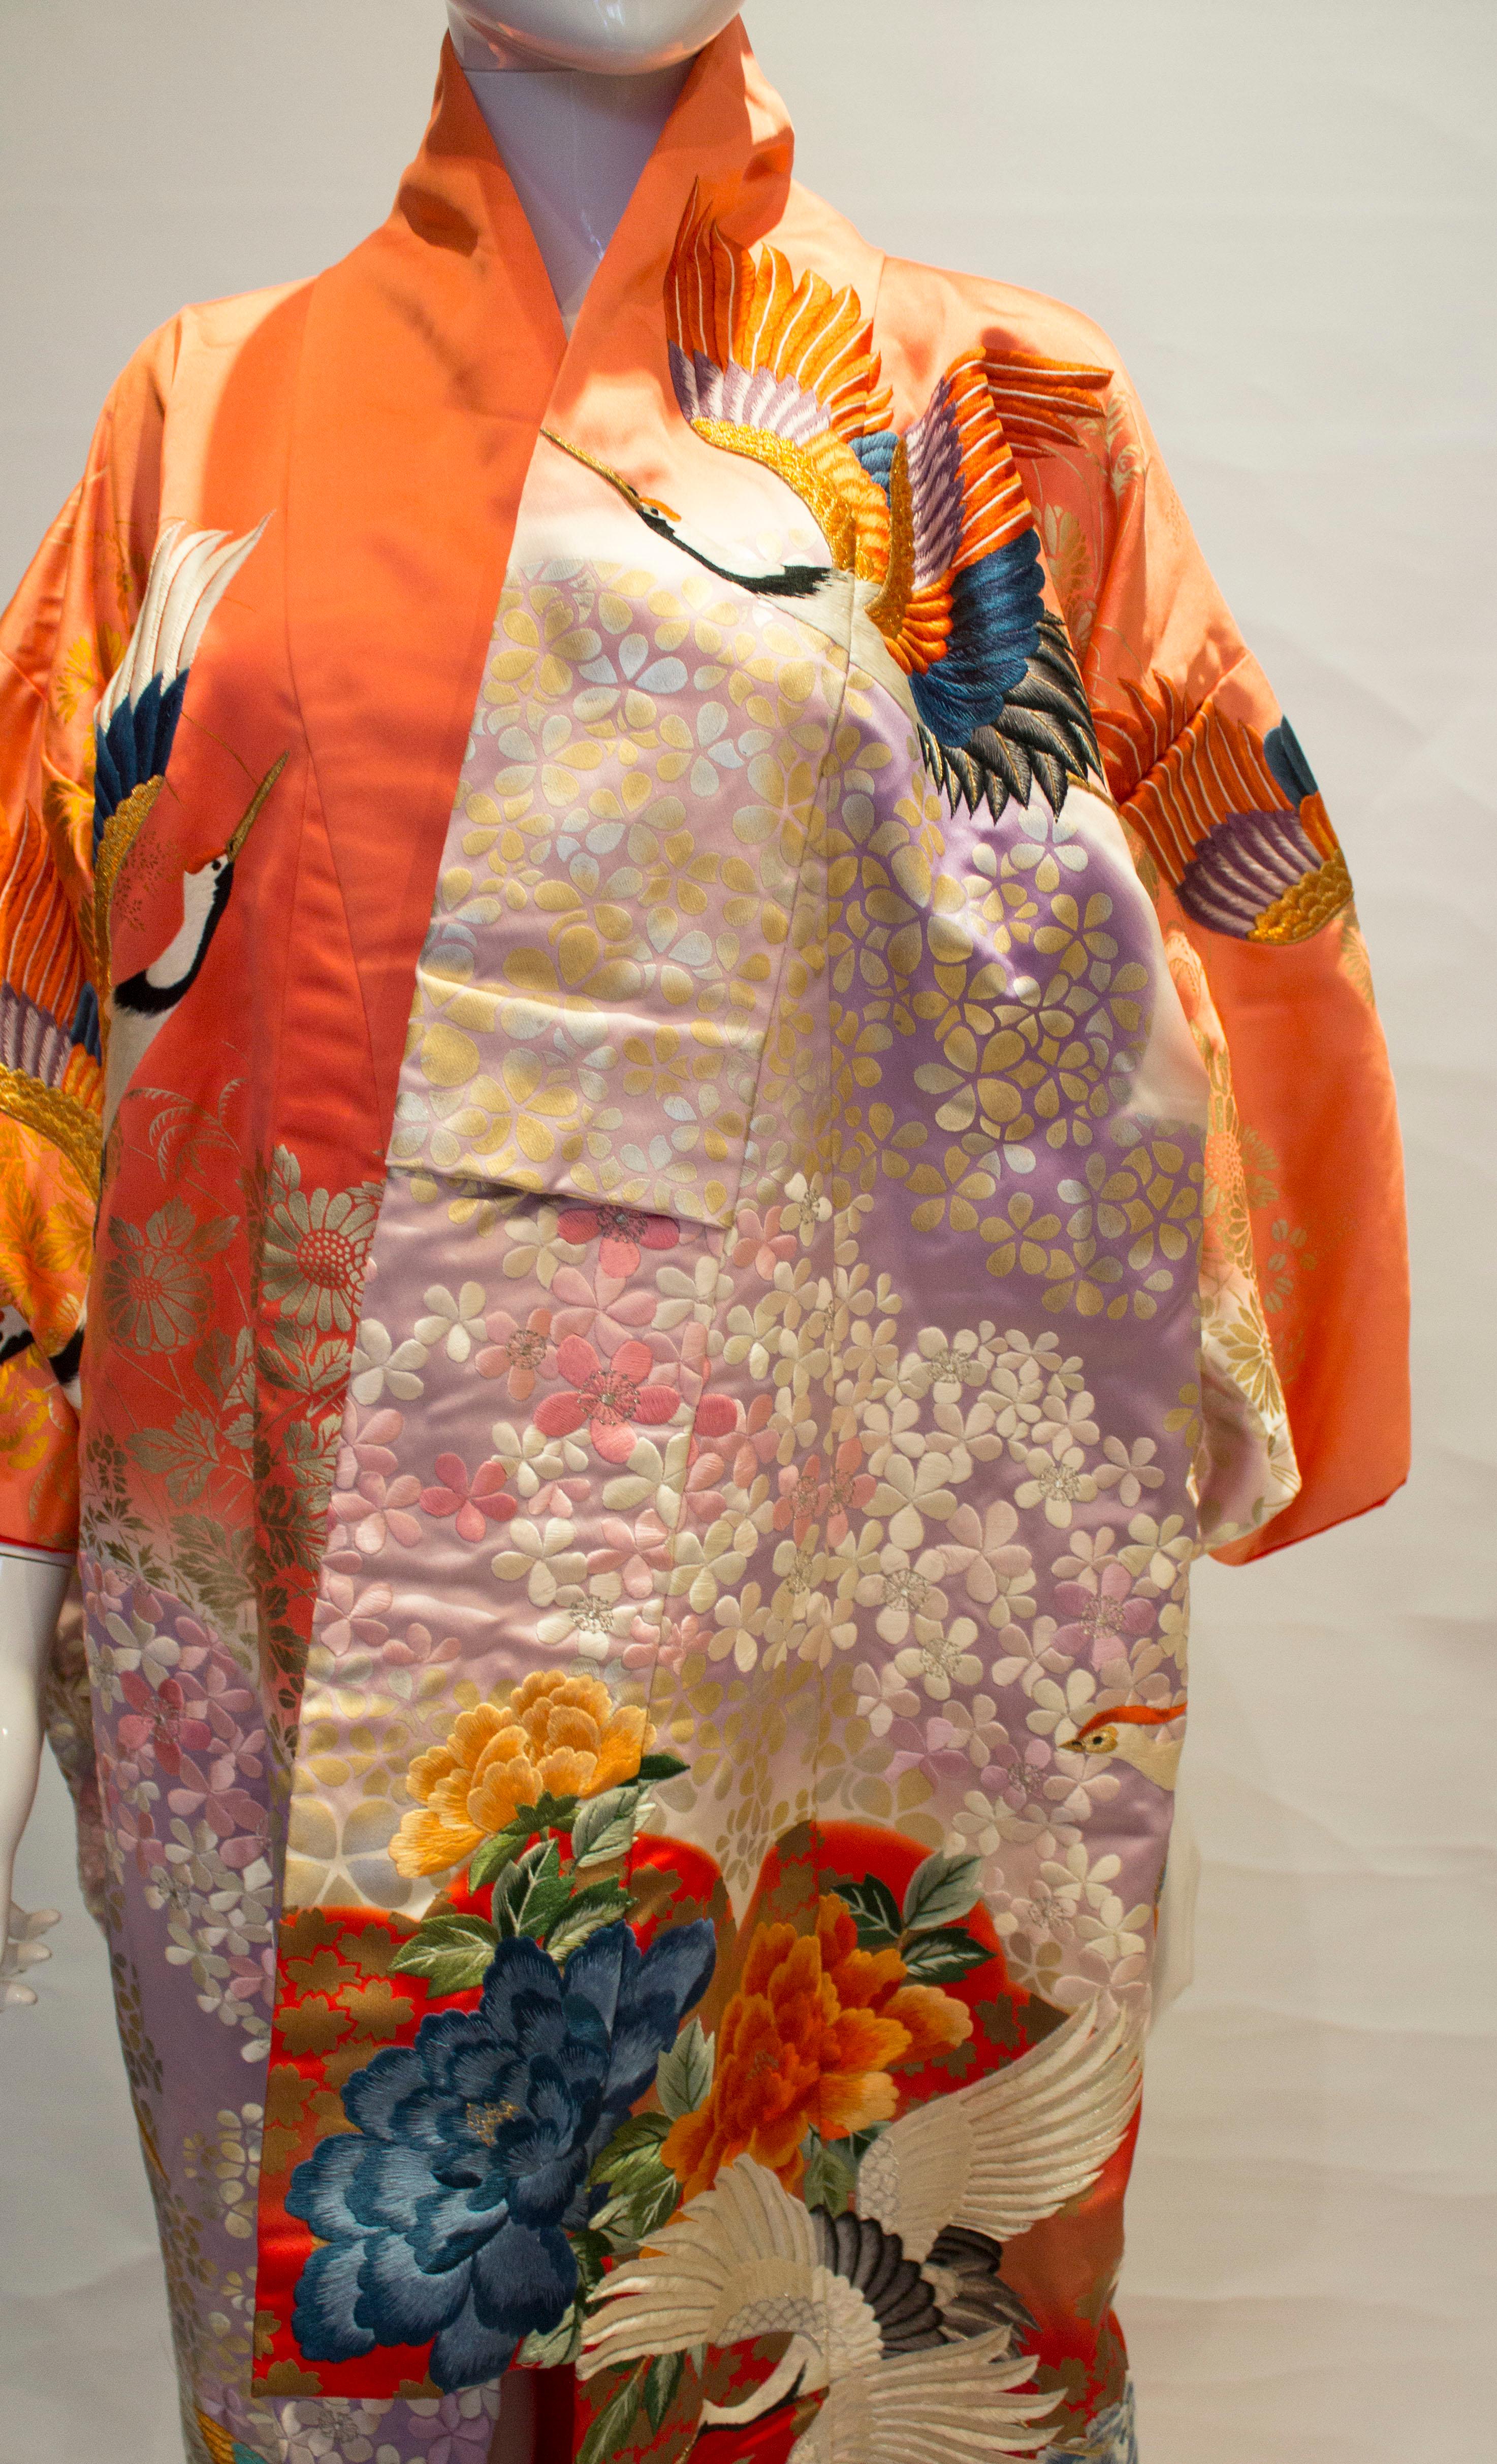 A stunning wedding kimono from the 1970s. The kimono has wonderful embroidery with flower and crane detail in shades of pink, red and orange, It is lined in red.

Measurements bust up to 51'', length 72''